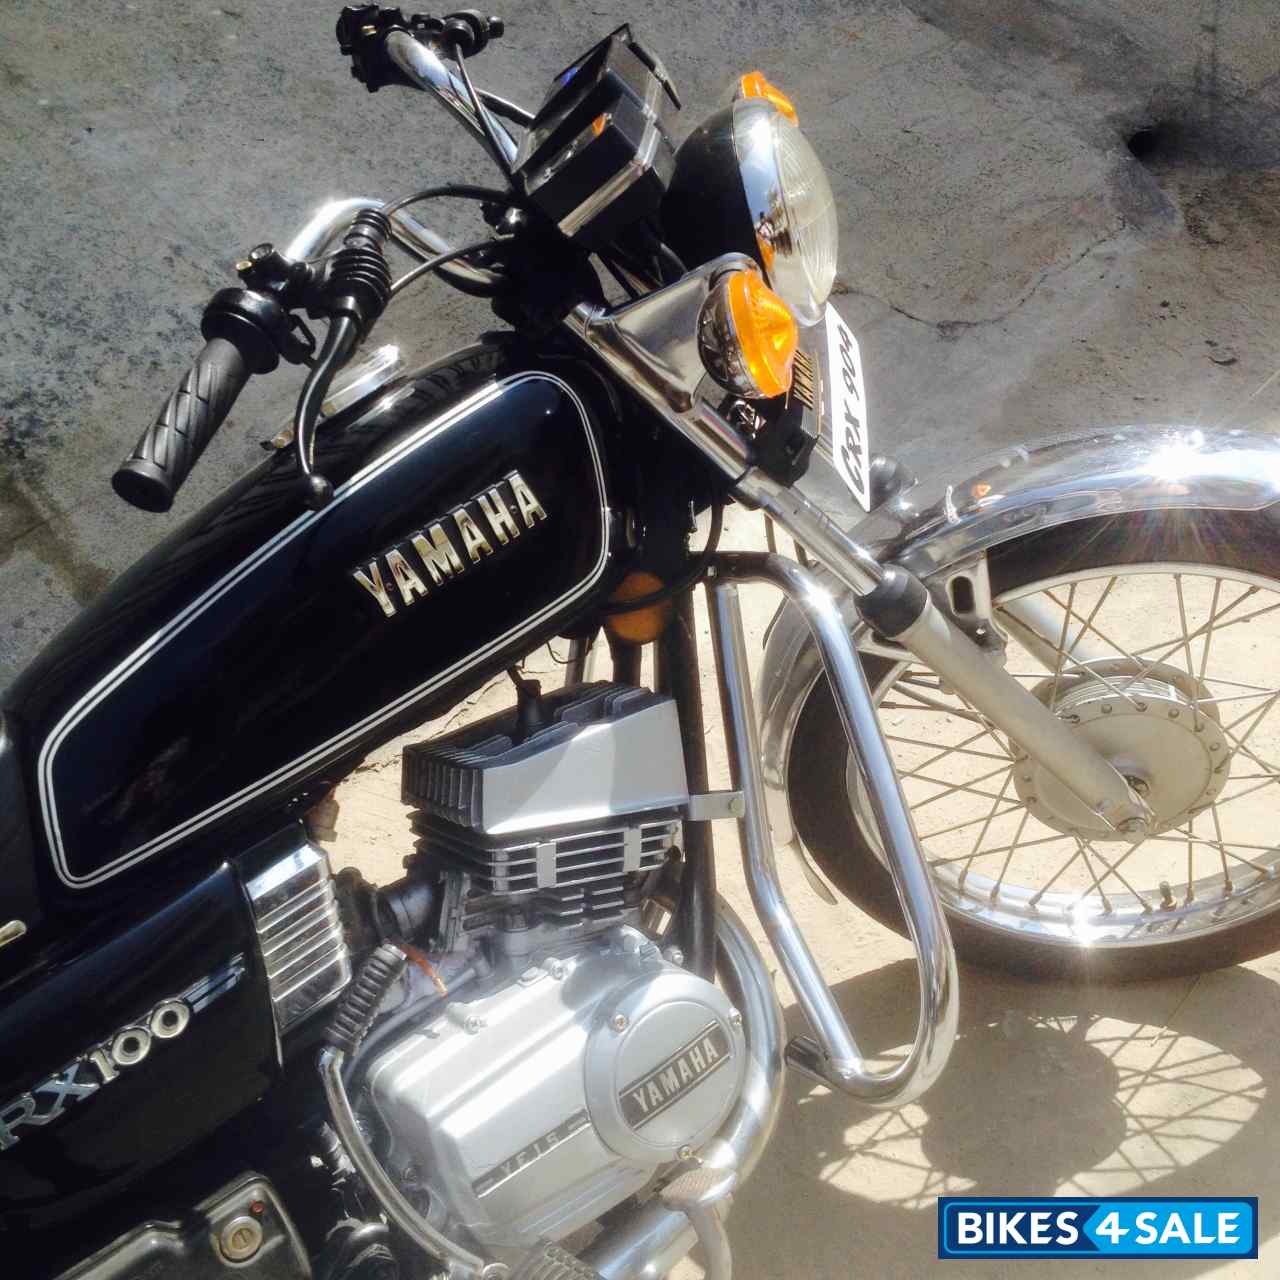 Used 1988 Model Yamaha Rx 100 For Sale In Bangalore Id 128805